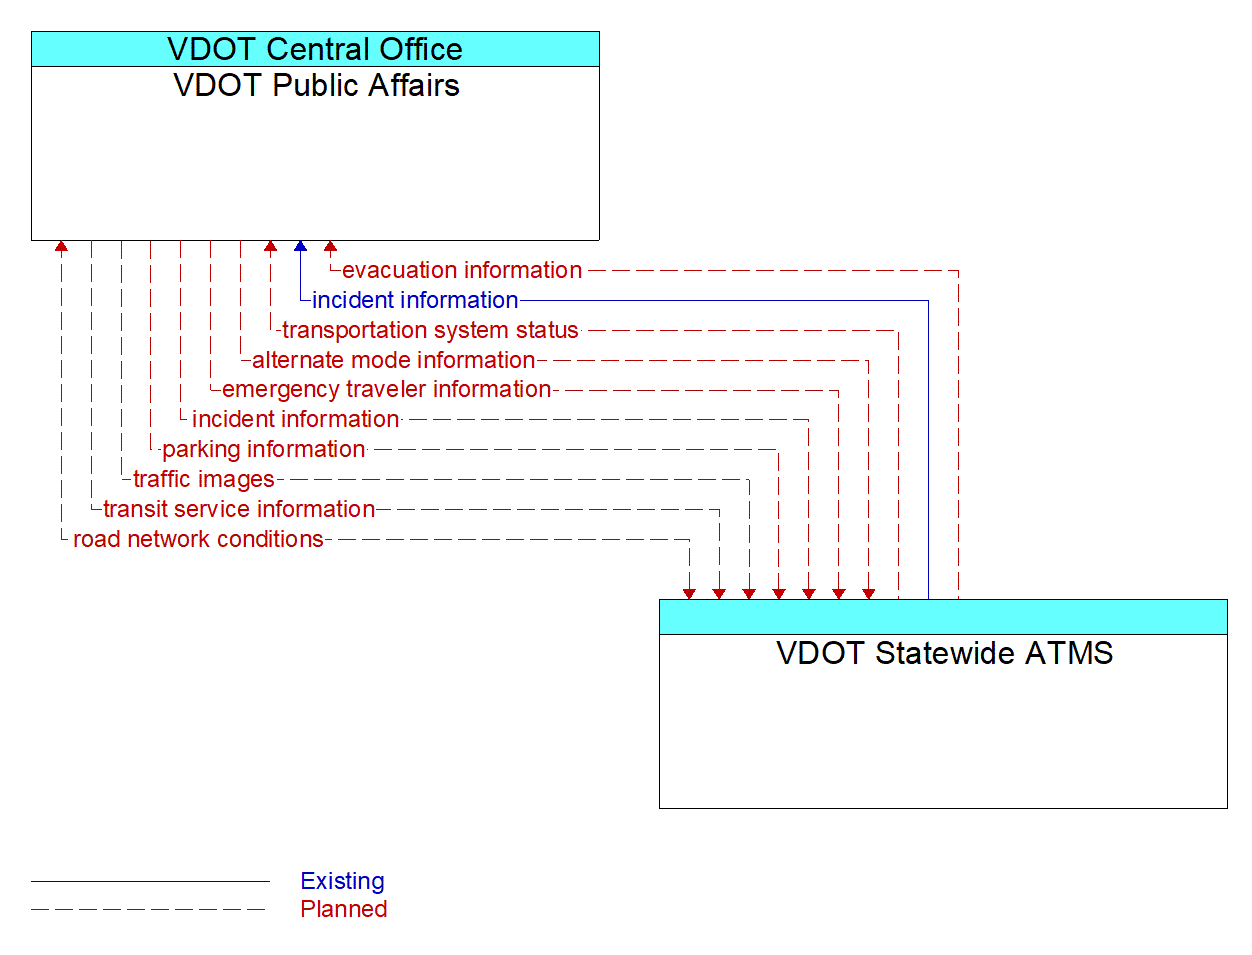 Architecture Flow Diagram: VDOT Statewide ATMS <--> VDOT Public Affairs